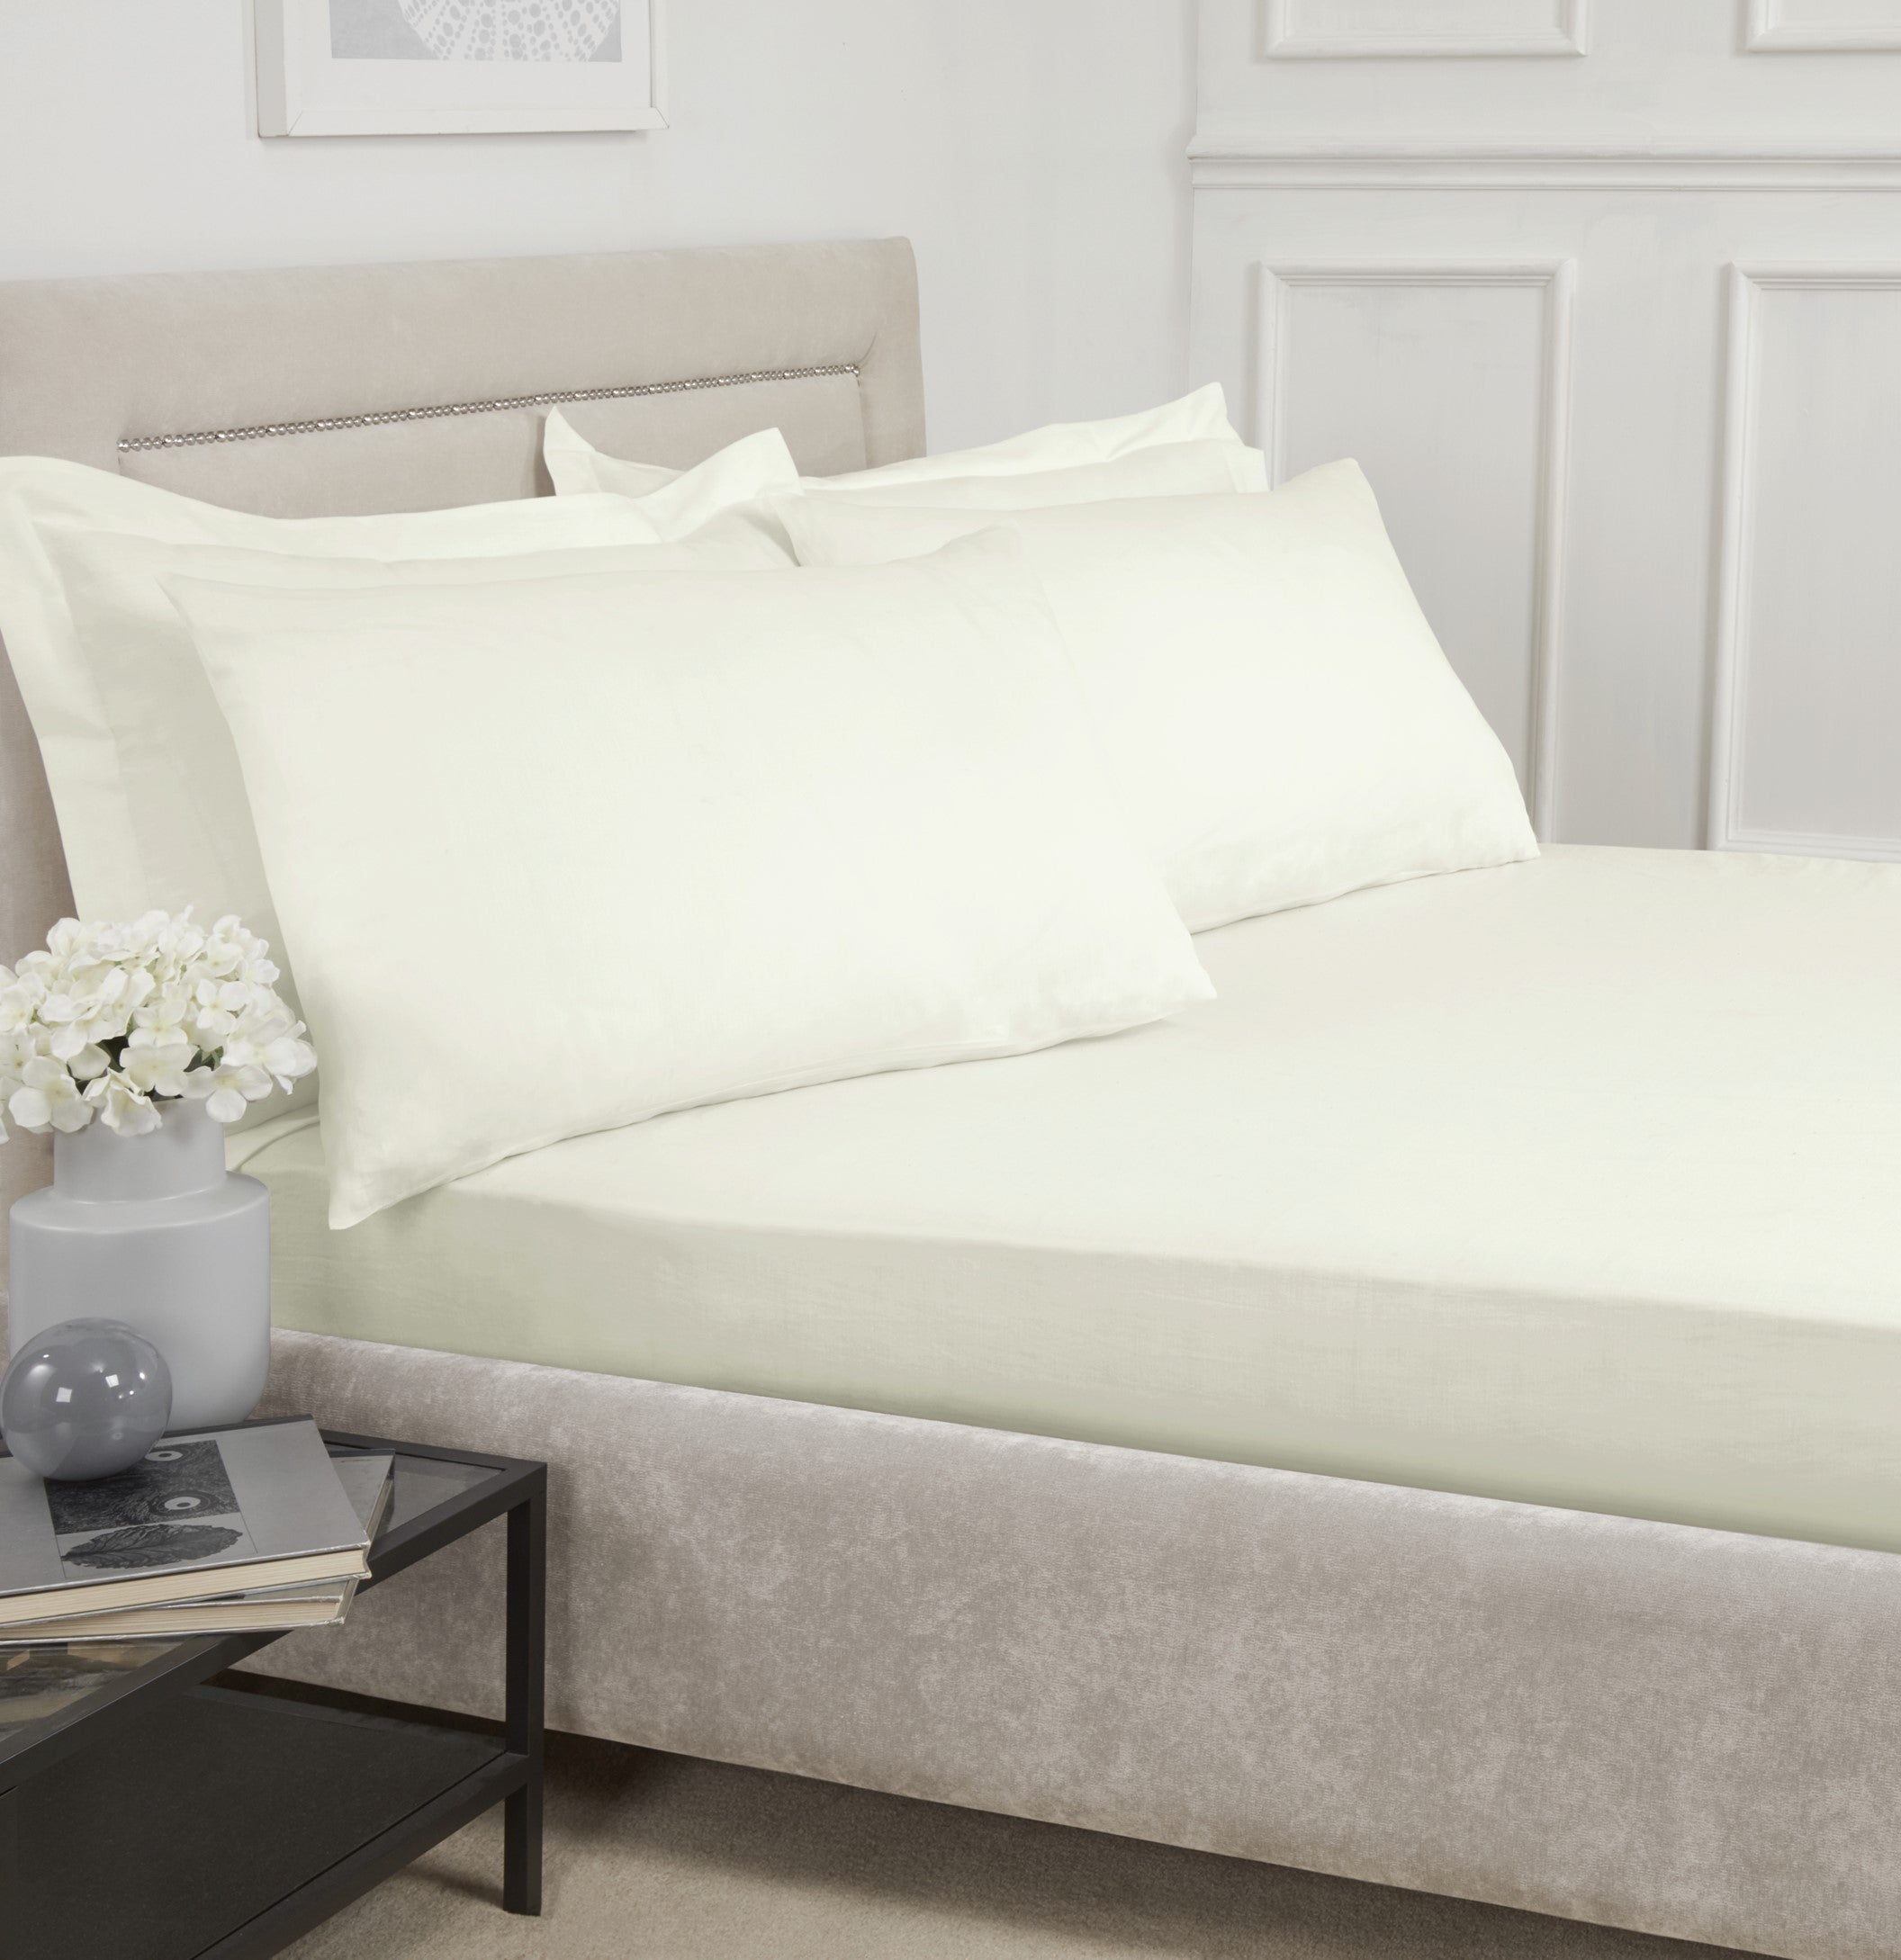 Lewis’s 100% Cotton Fitted Bedding Range - Cream - King Fitted Sheet  | TJ Hughes